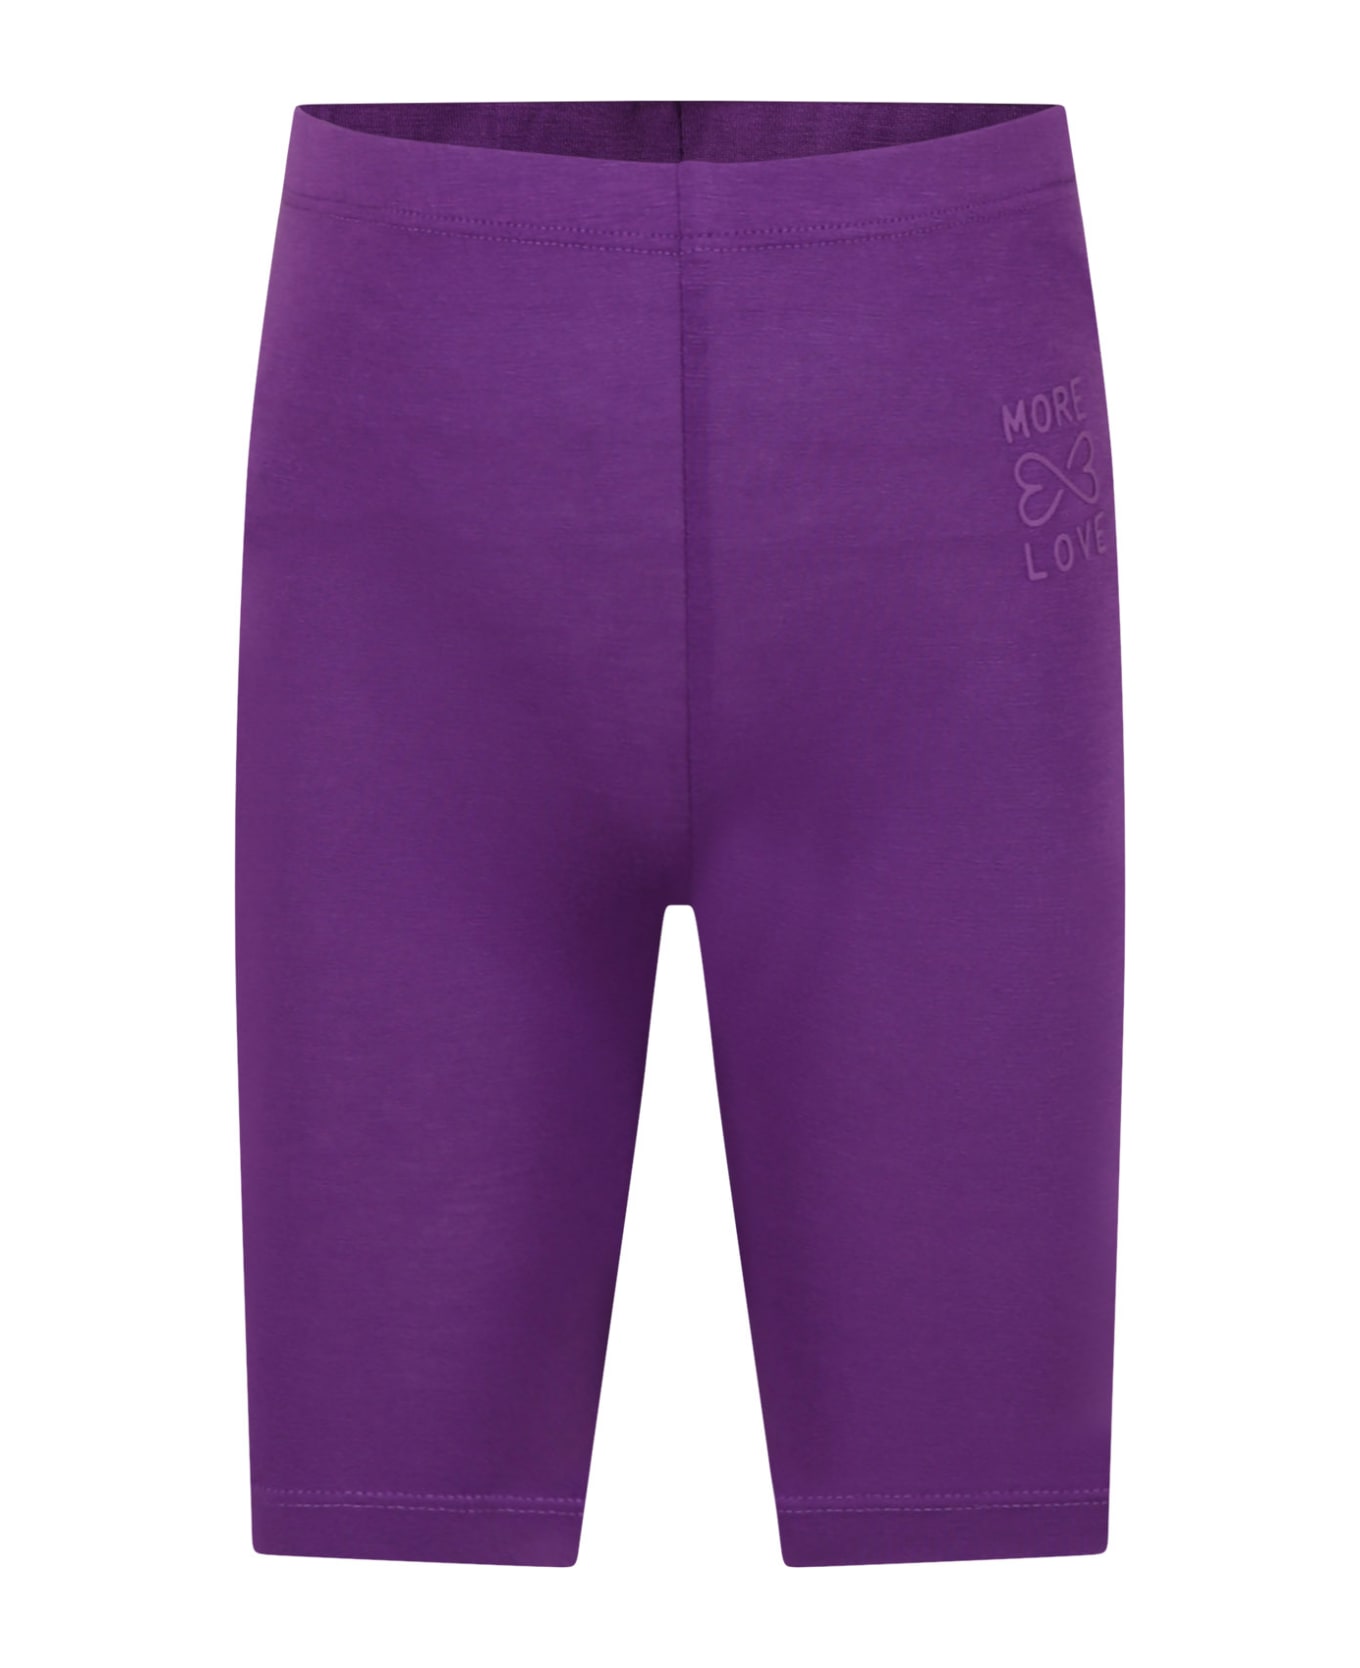 Molo Purple Leggings For Girl With Writing - Violet